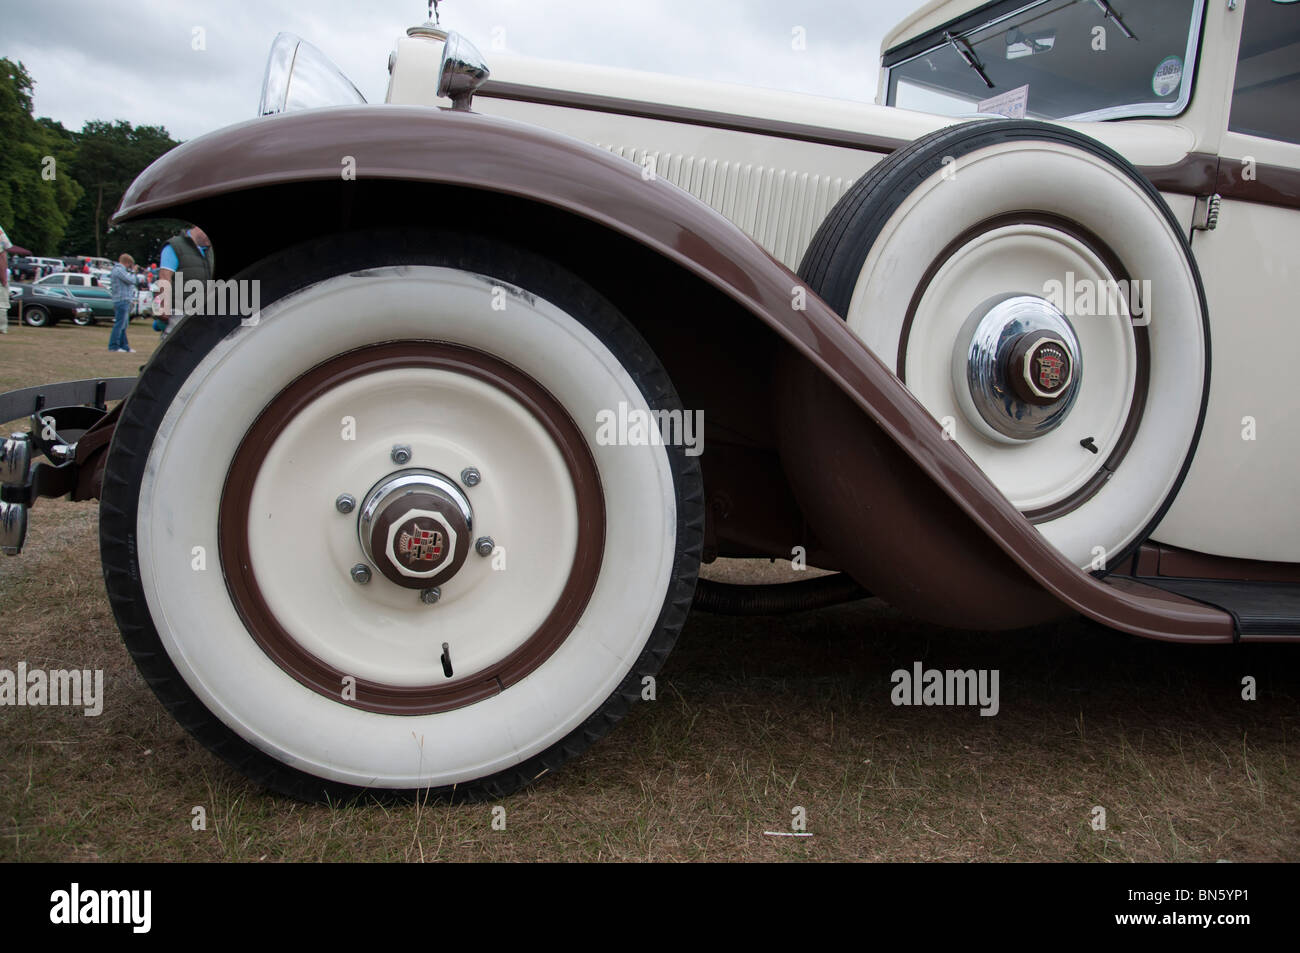 The wheel and arch of a 1930's Cadillac car at an American car show on 4th July 'Independence day' in Tatton Park, Cheshire. Stock Photo